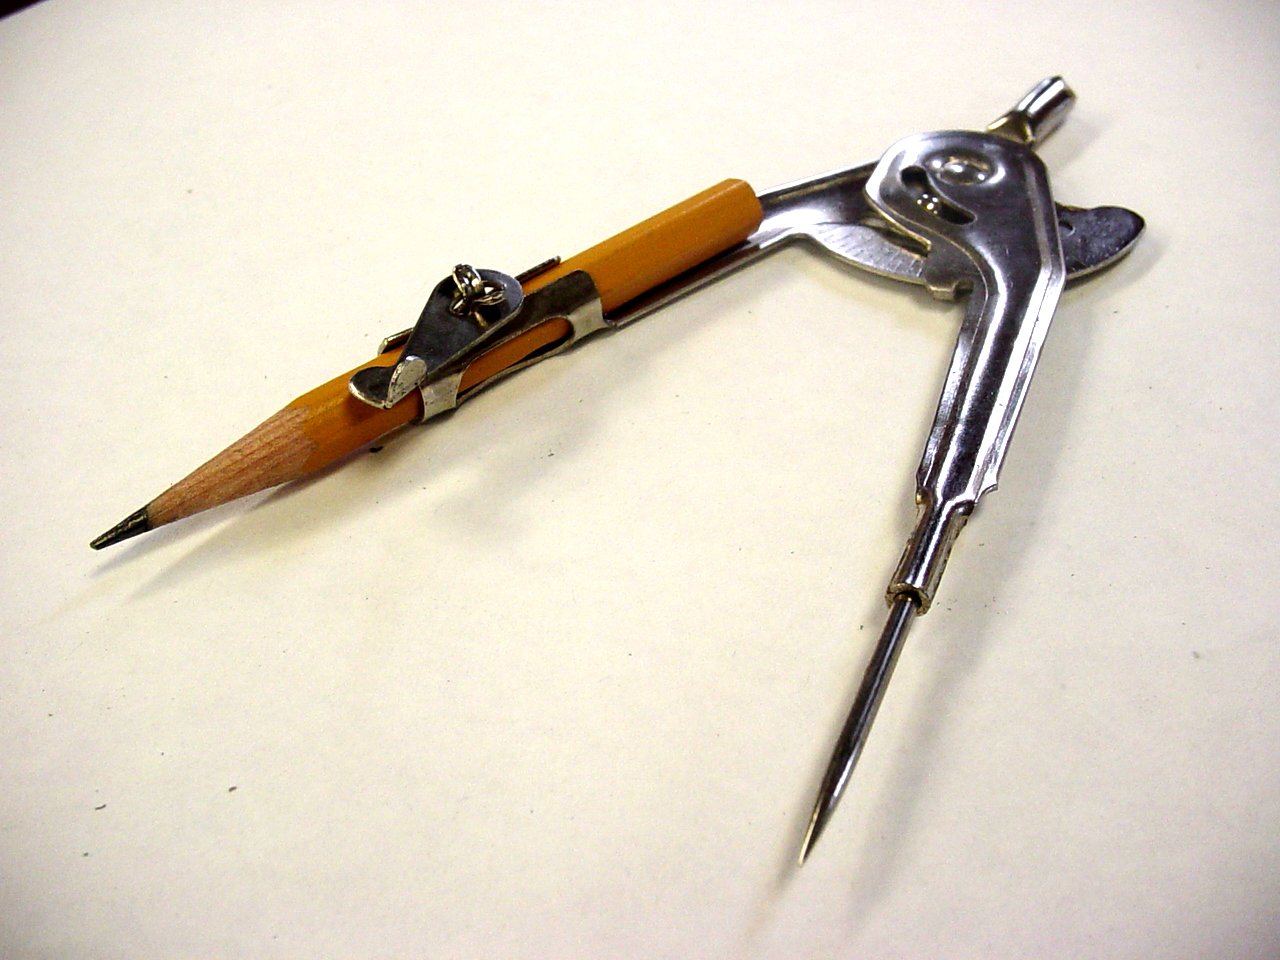 an antique manining tool with a wooden handle on a white surface